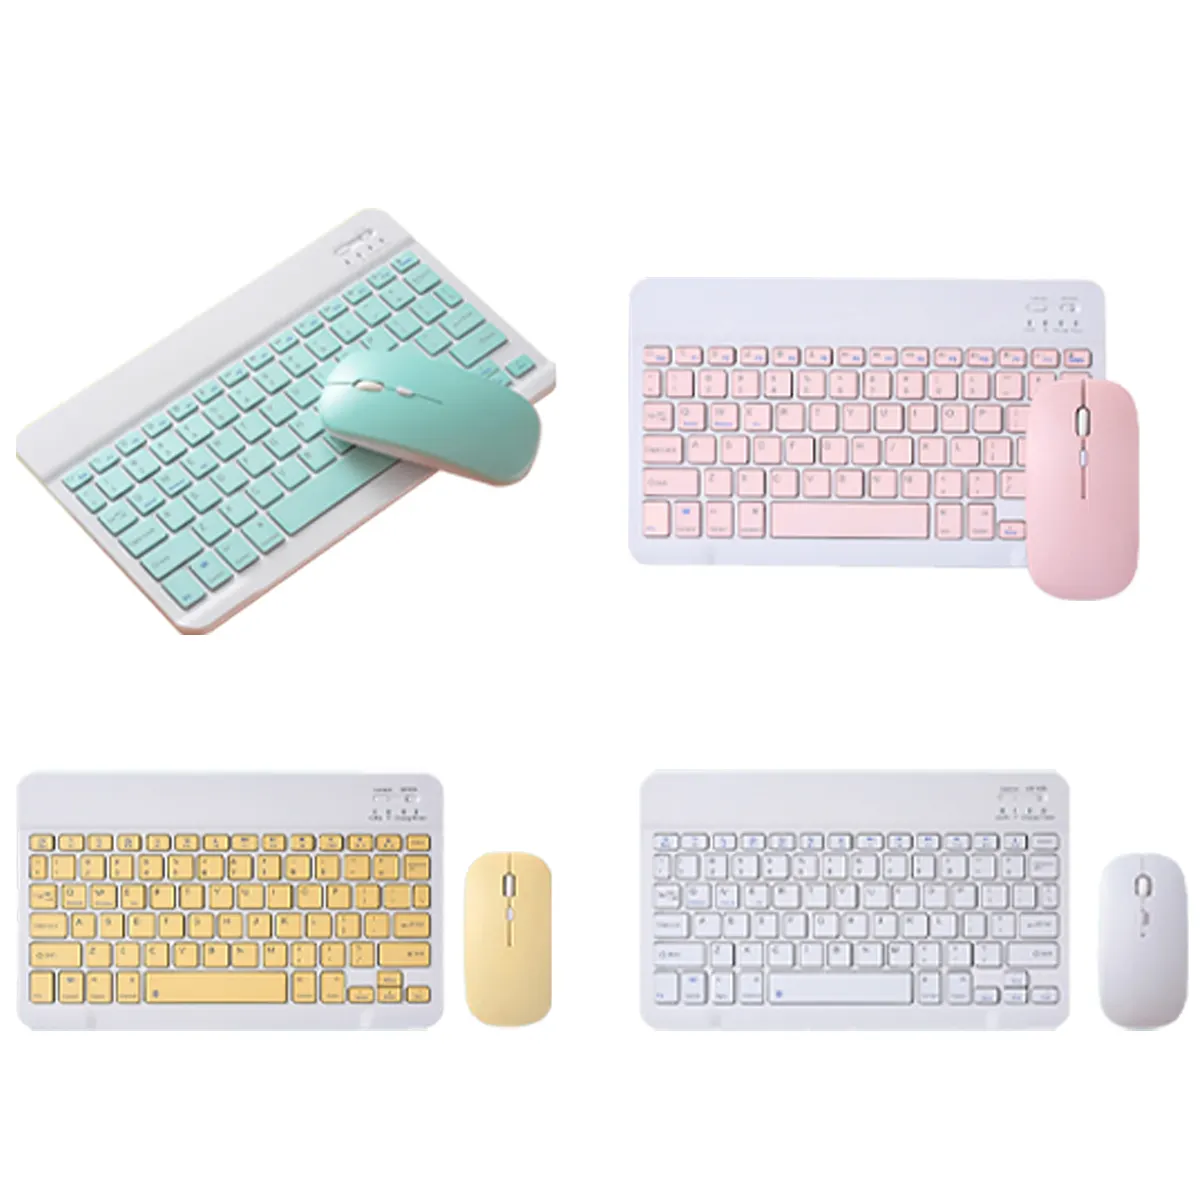 Hot spot BT mini wireless portable ultra-thin keyboard and mouse set suitable for ipad tablet mobile phone